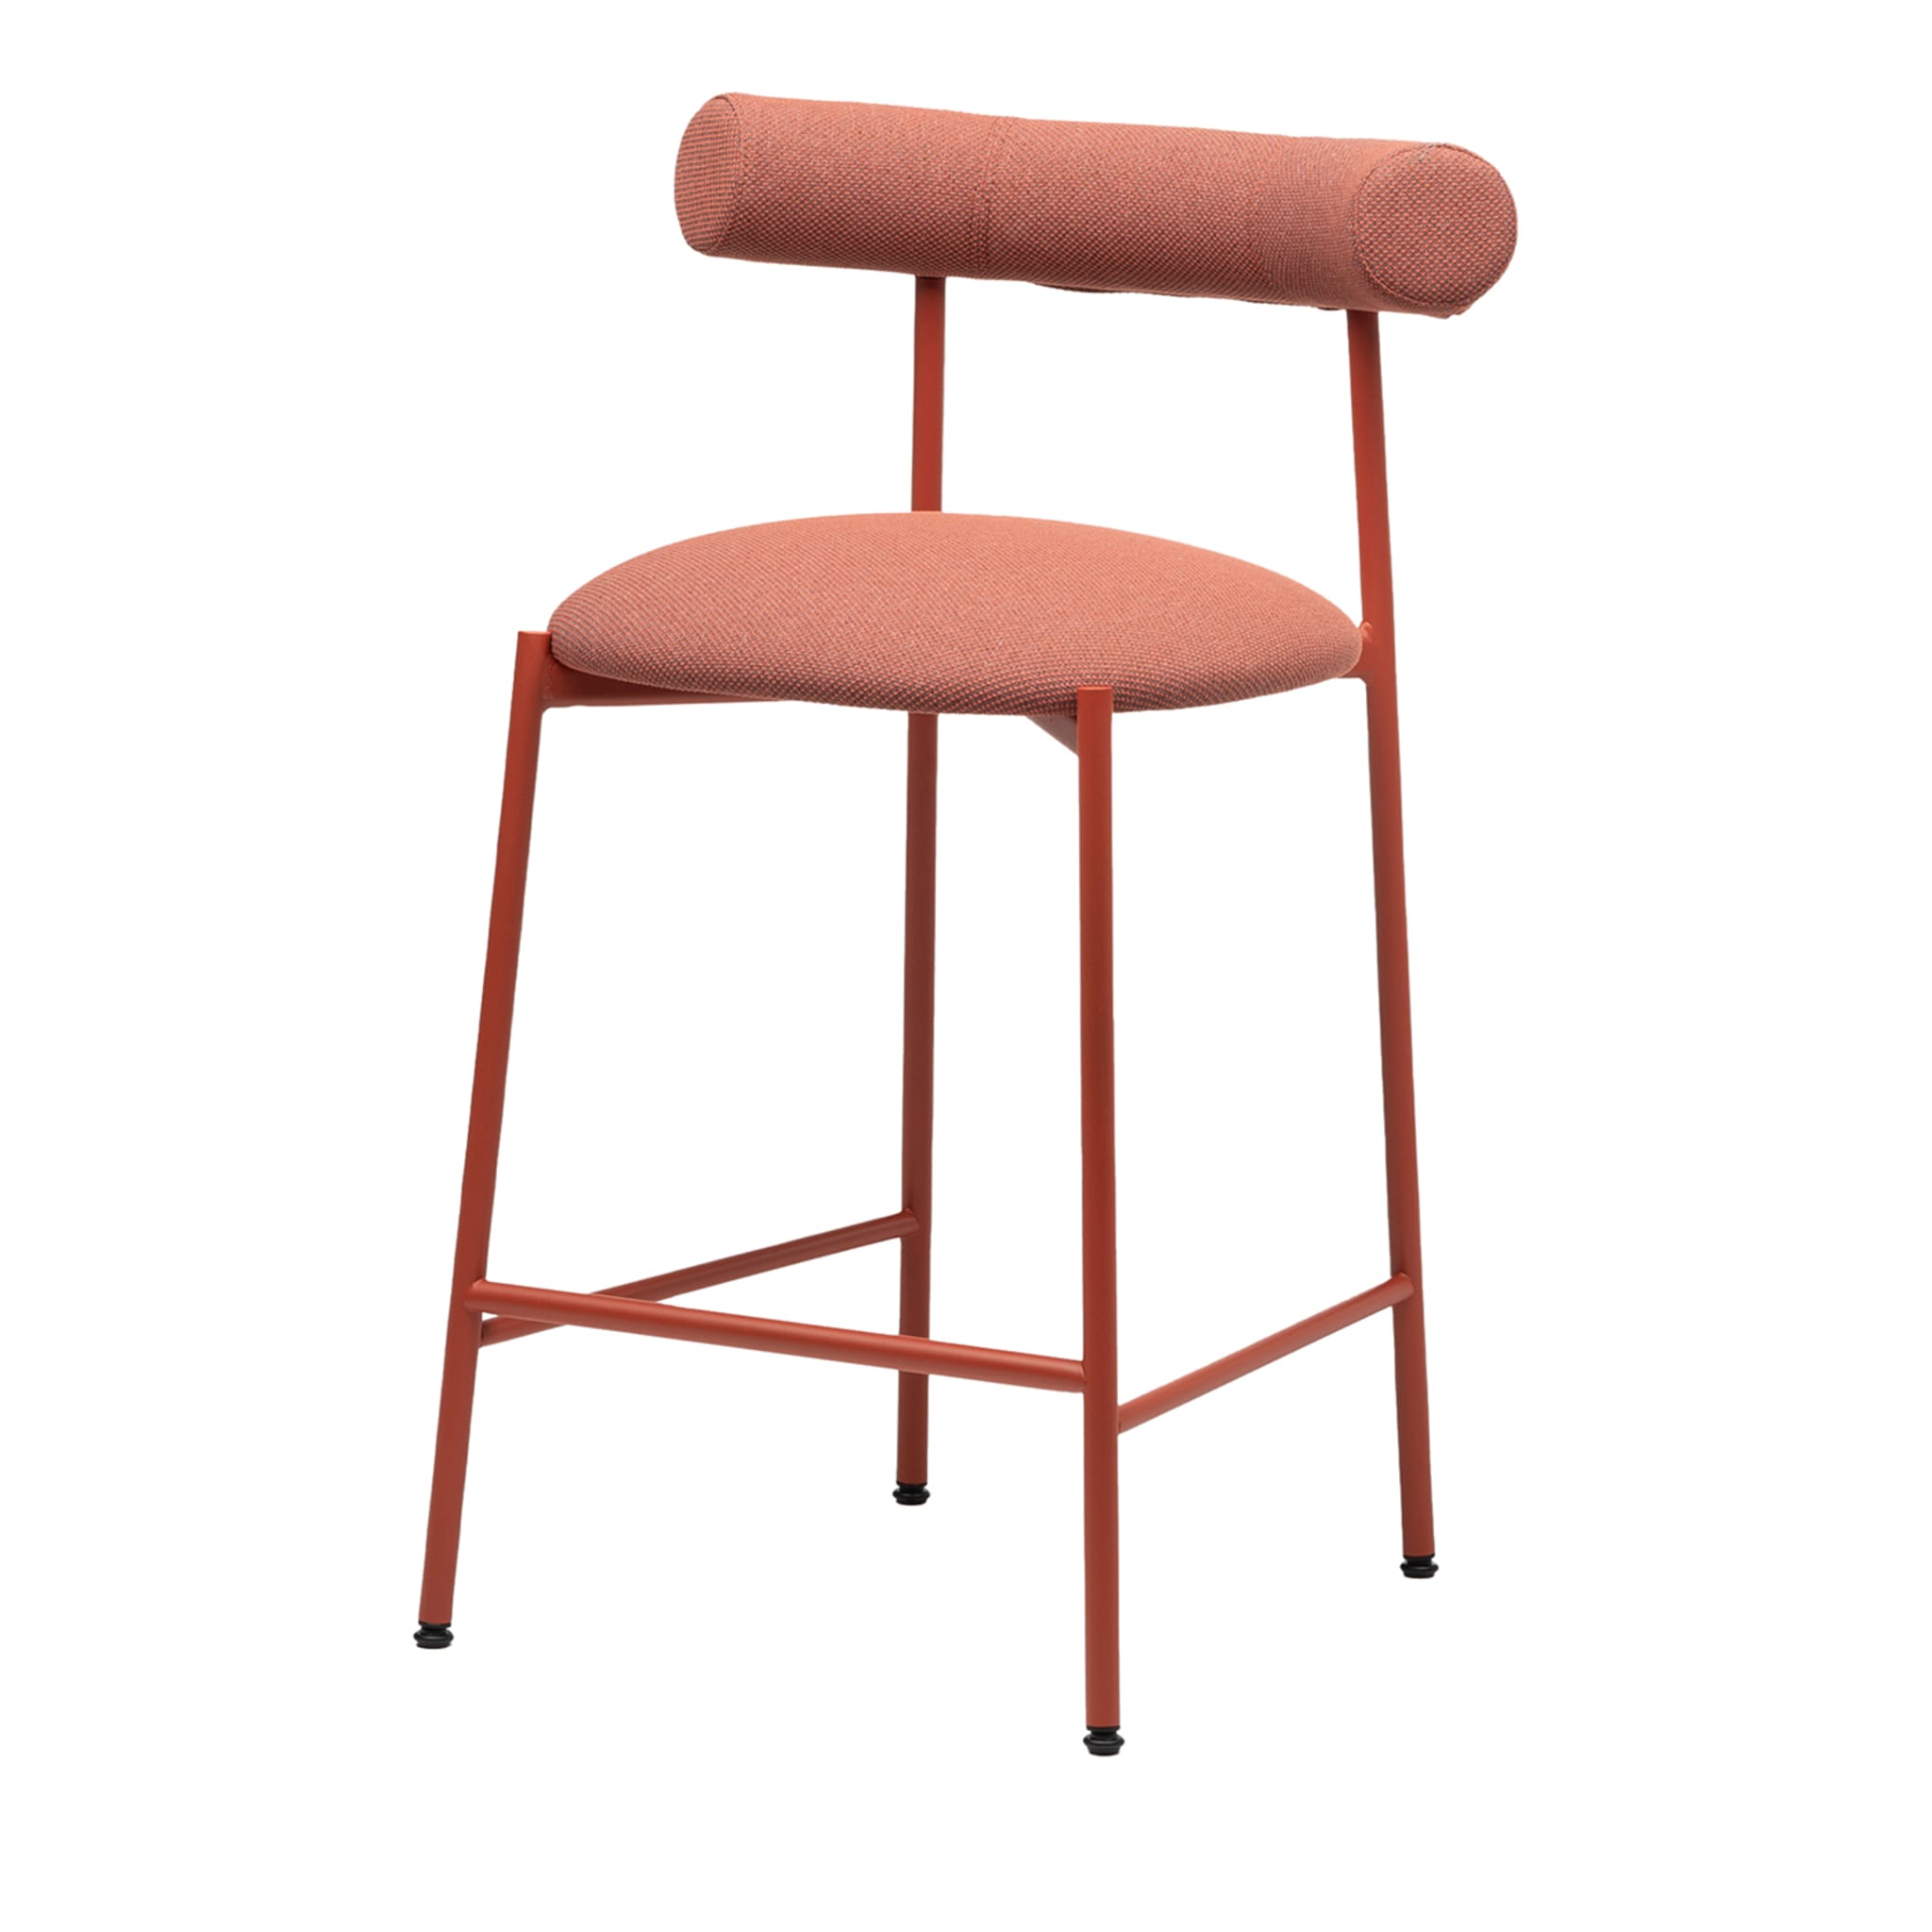 Pampa SG-65 Low Pink & Red Stool by Studio Pastina - Main view